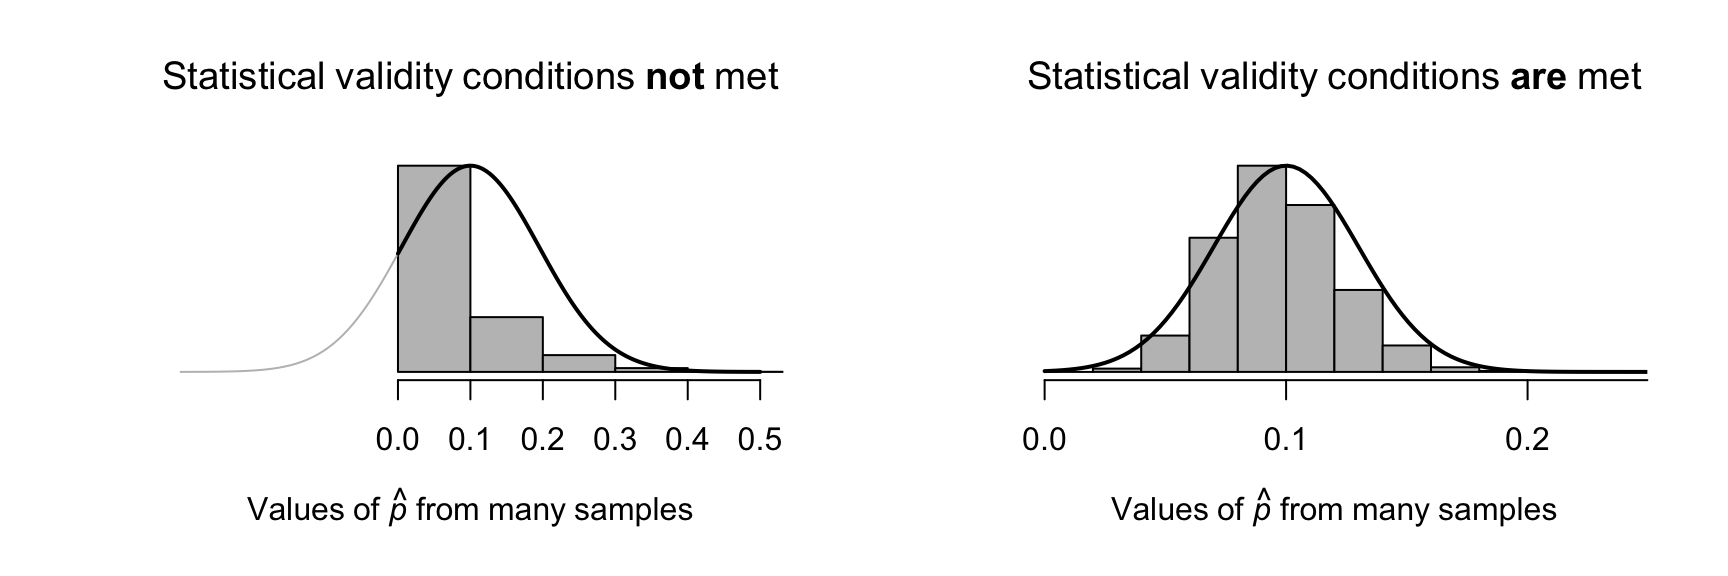 Two proposed sampling distributions. Left: When the statistical validity conditions are not met. Right: when the statistical validity conditions are met.